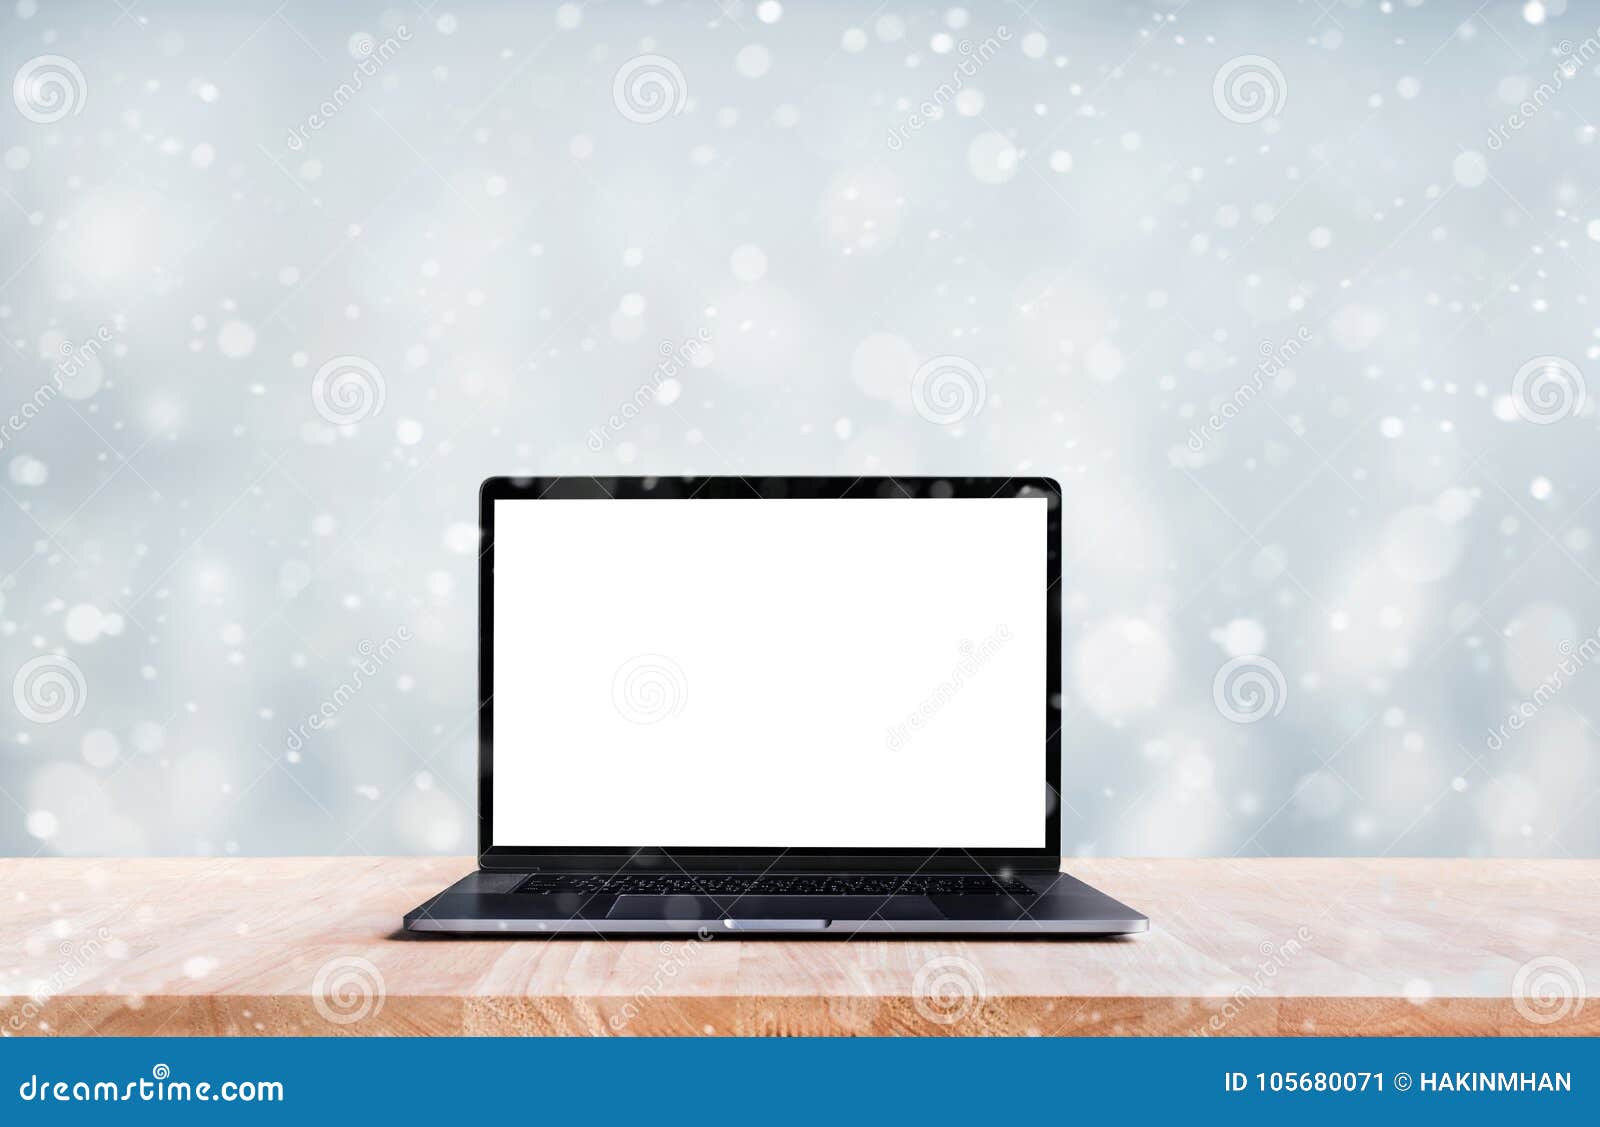 computer,laptop with blank screen on snowfall in winter season